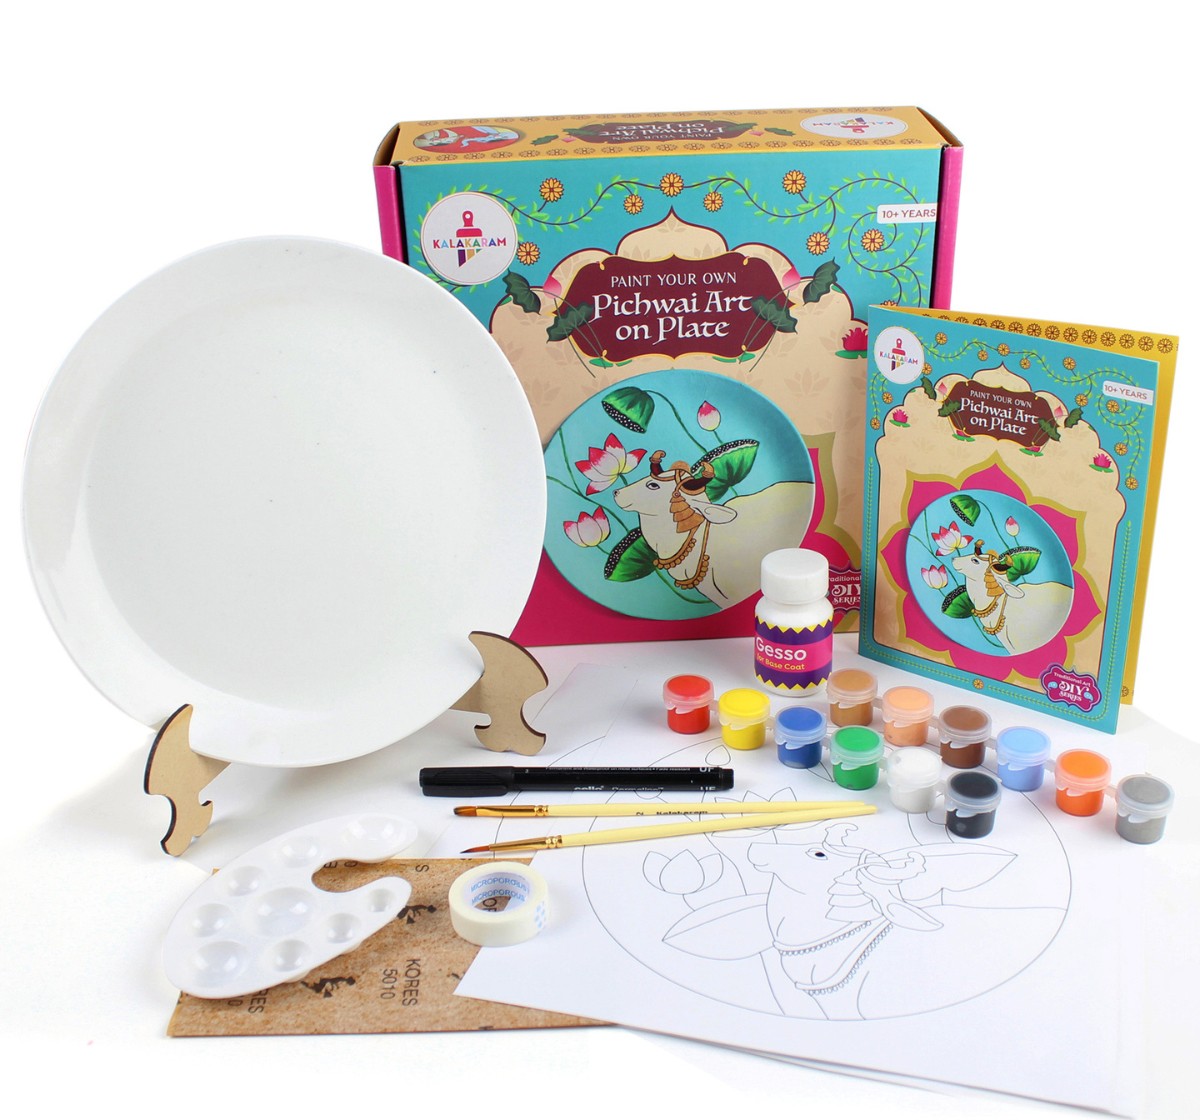 Kalakaram Paint Pichwai Art on Plate Painting Kit for Kids, Painting and Educational Kit for Kids, 12Y+, Multicolour